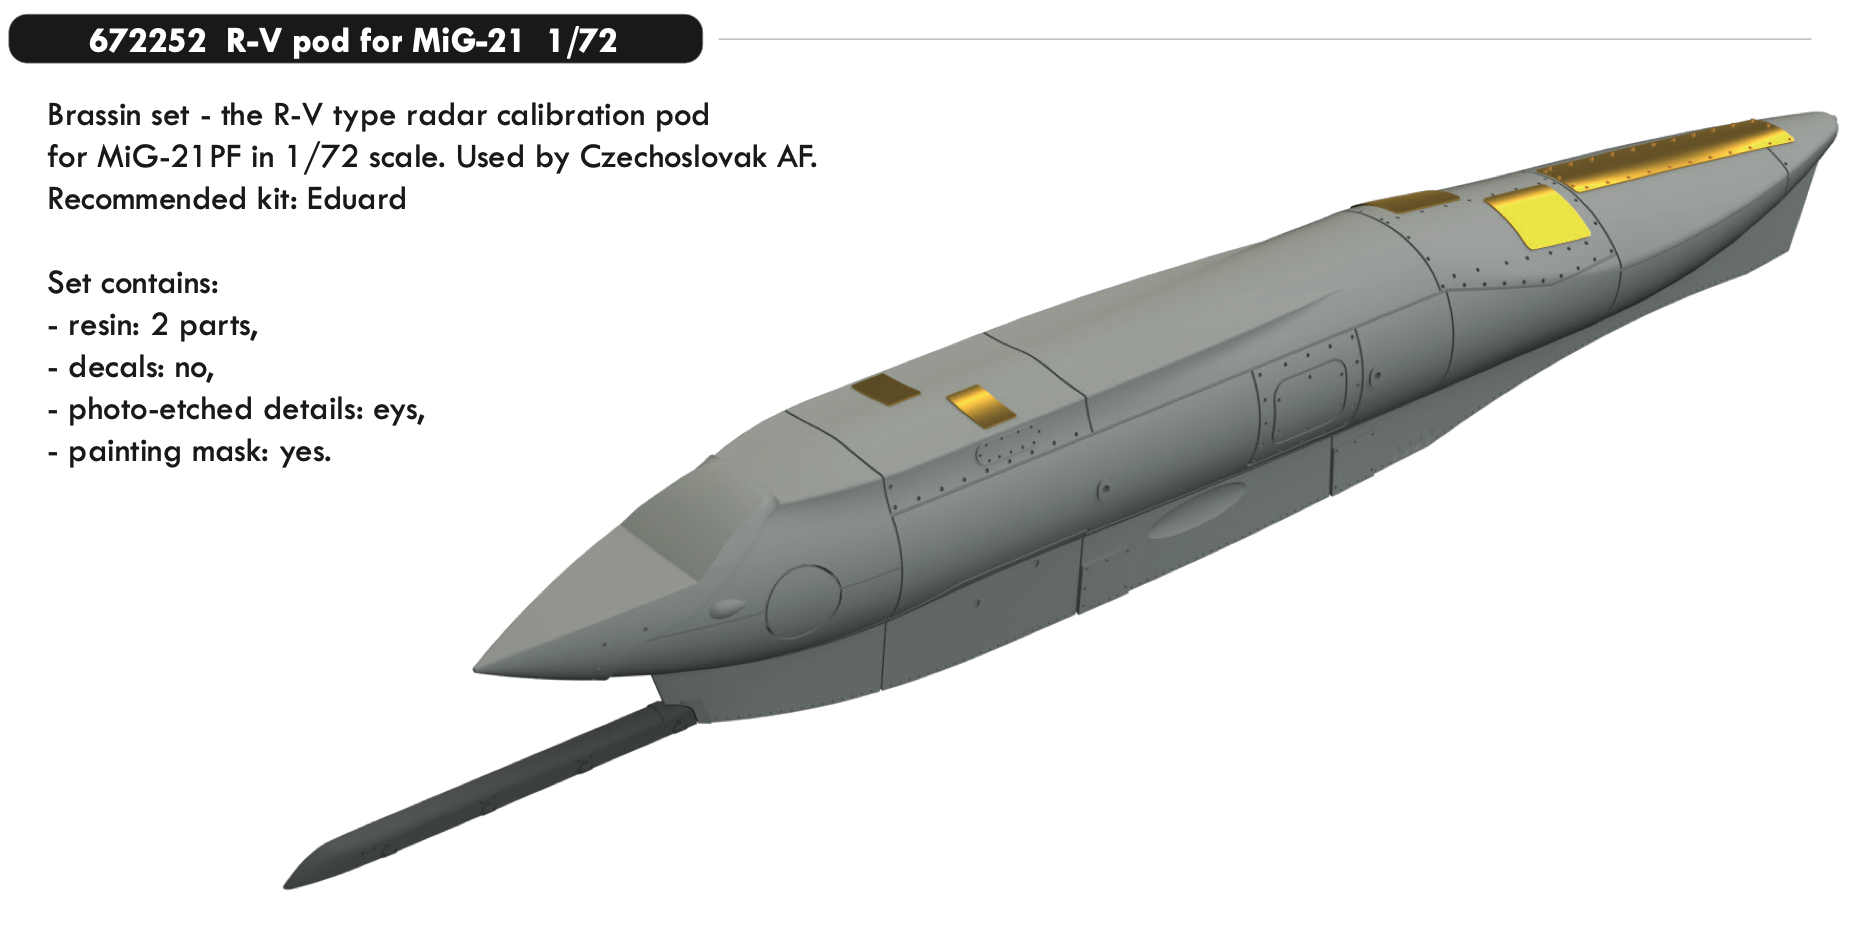 Additions (3D resin printing) 1/72 R-V pod for Mikoyan MiG-21 (designed to be used with Eduard kits)